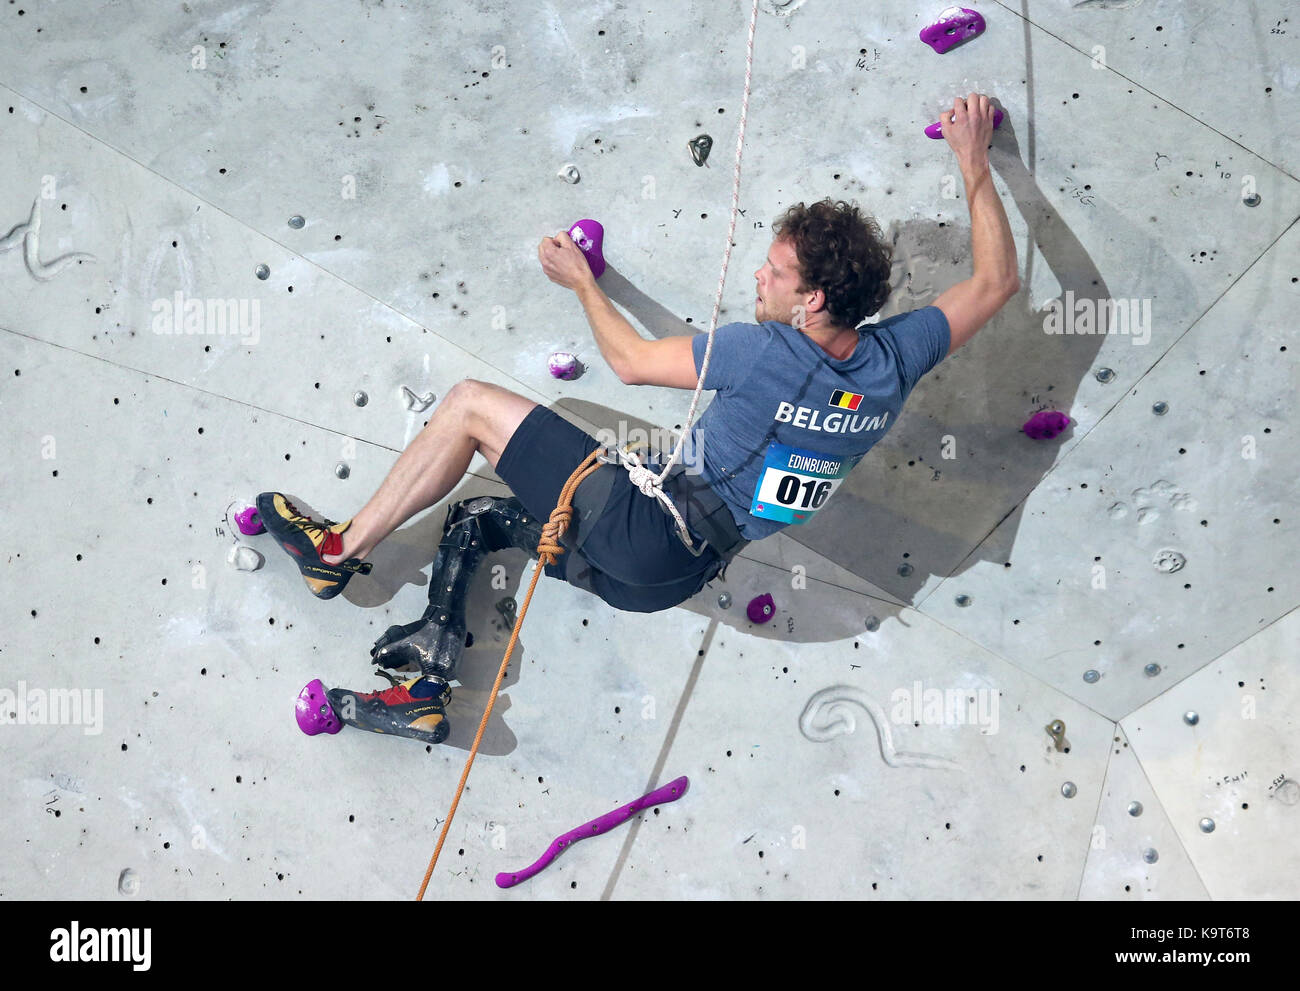 Belgium's Frederik Leys in the final of the Mens AL-2 (amputation lower) climb during the IFSC Climbing World Cup at the Edinburgh International Climbing Arena. Stock Photo